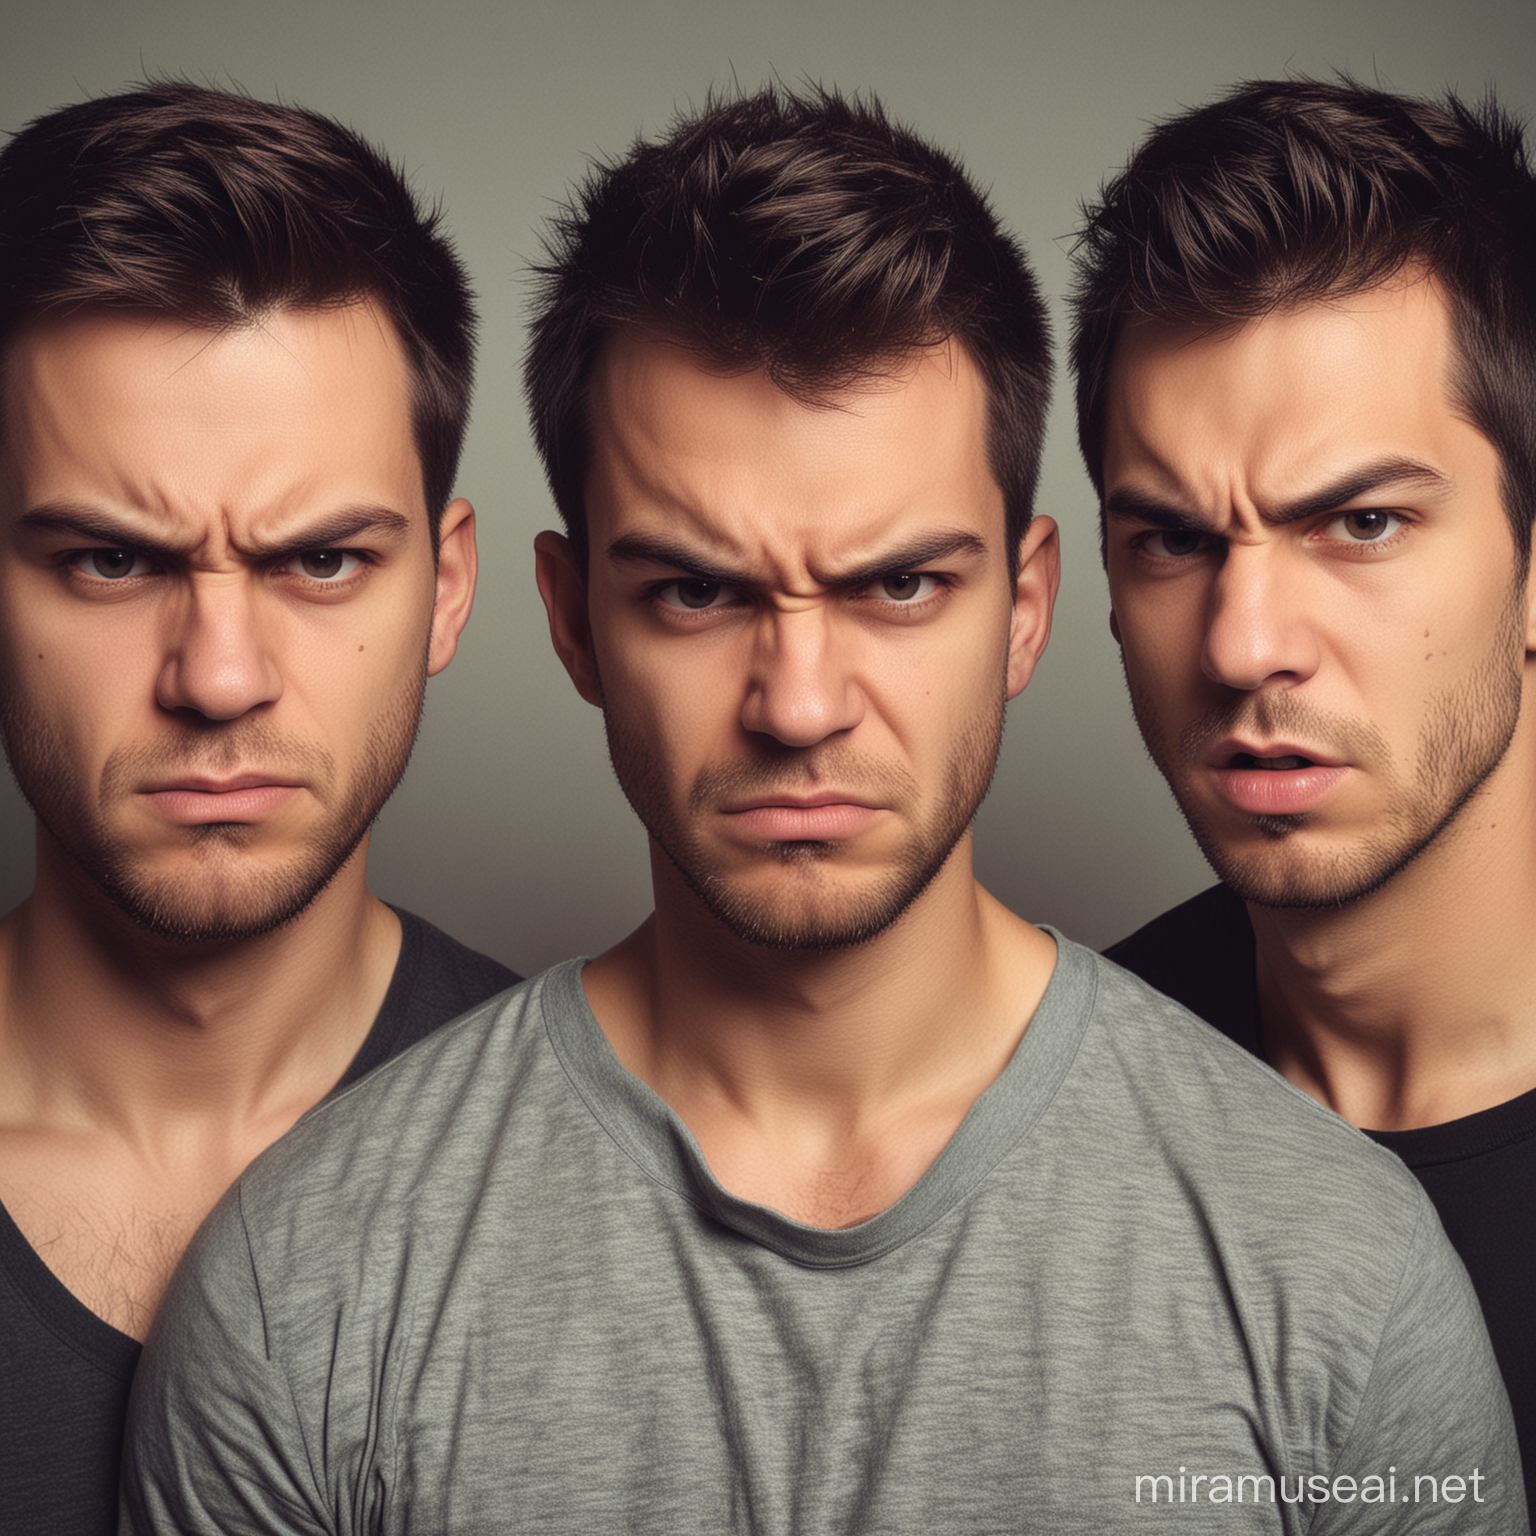 Generate me a picture of 3 menn looking very angry